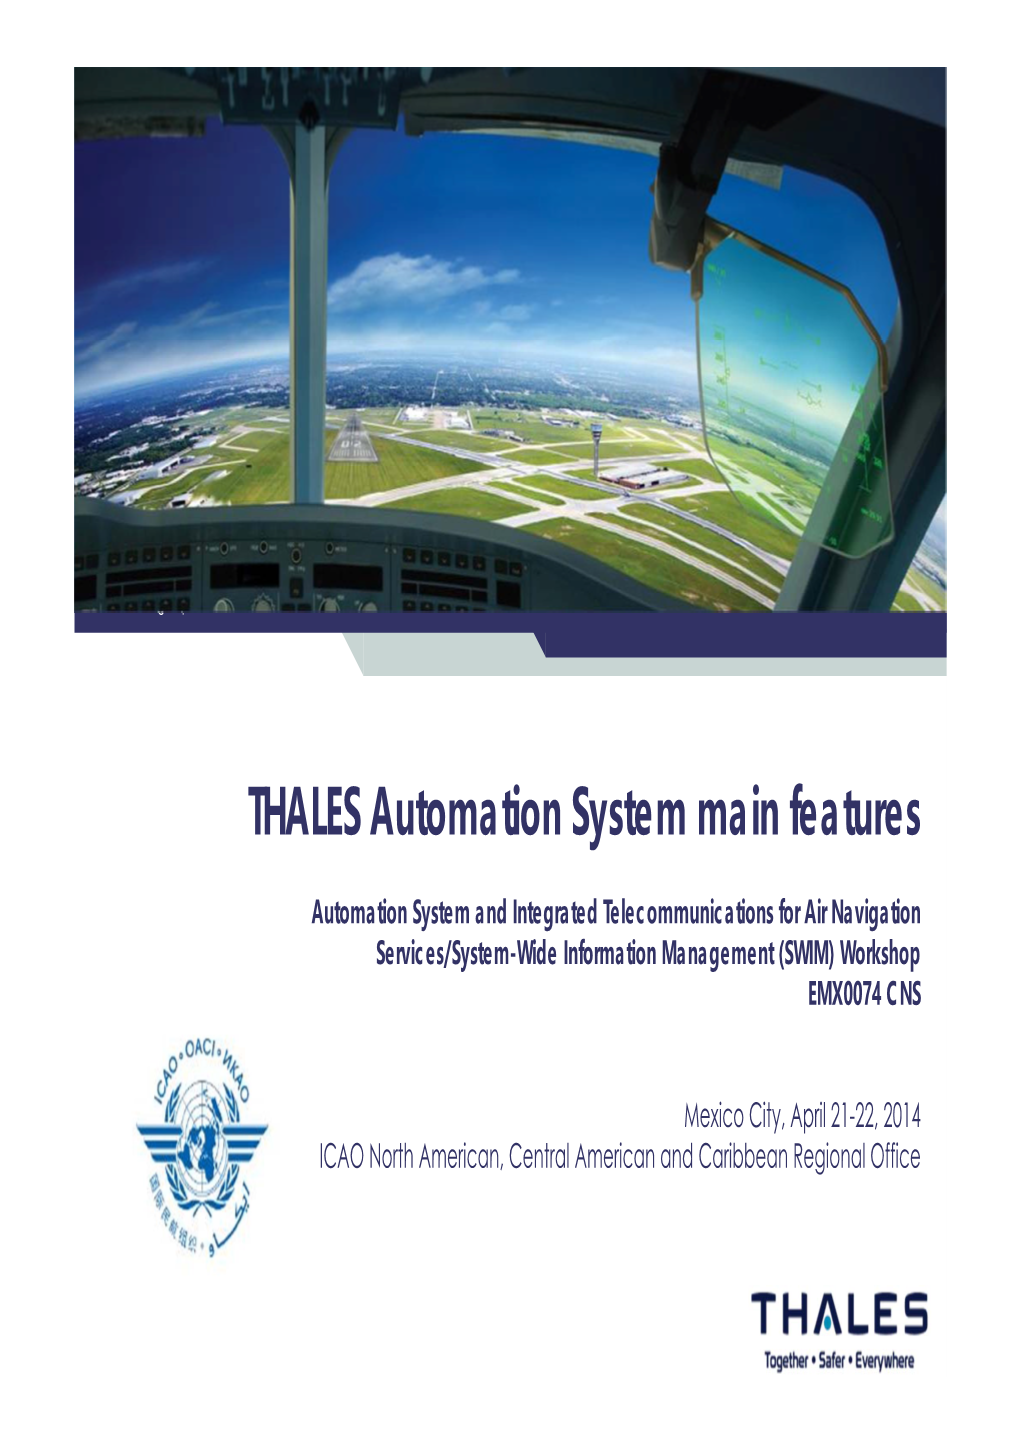 THALES Automation System Main Features